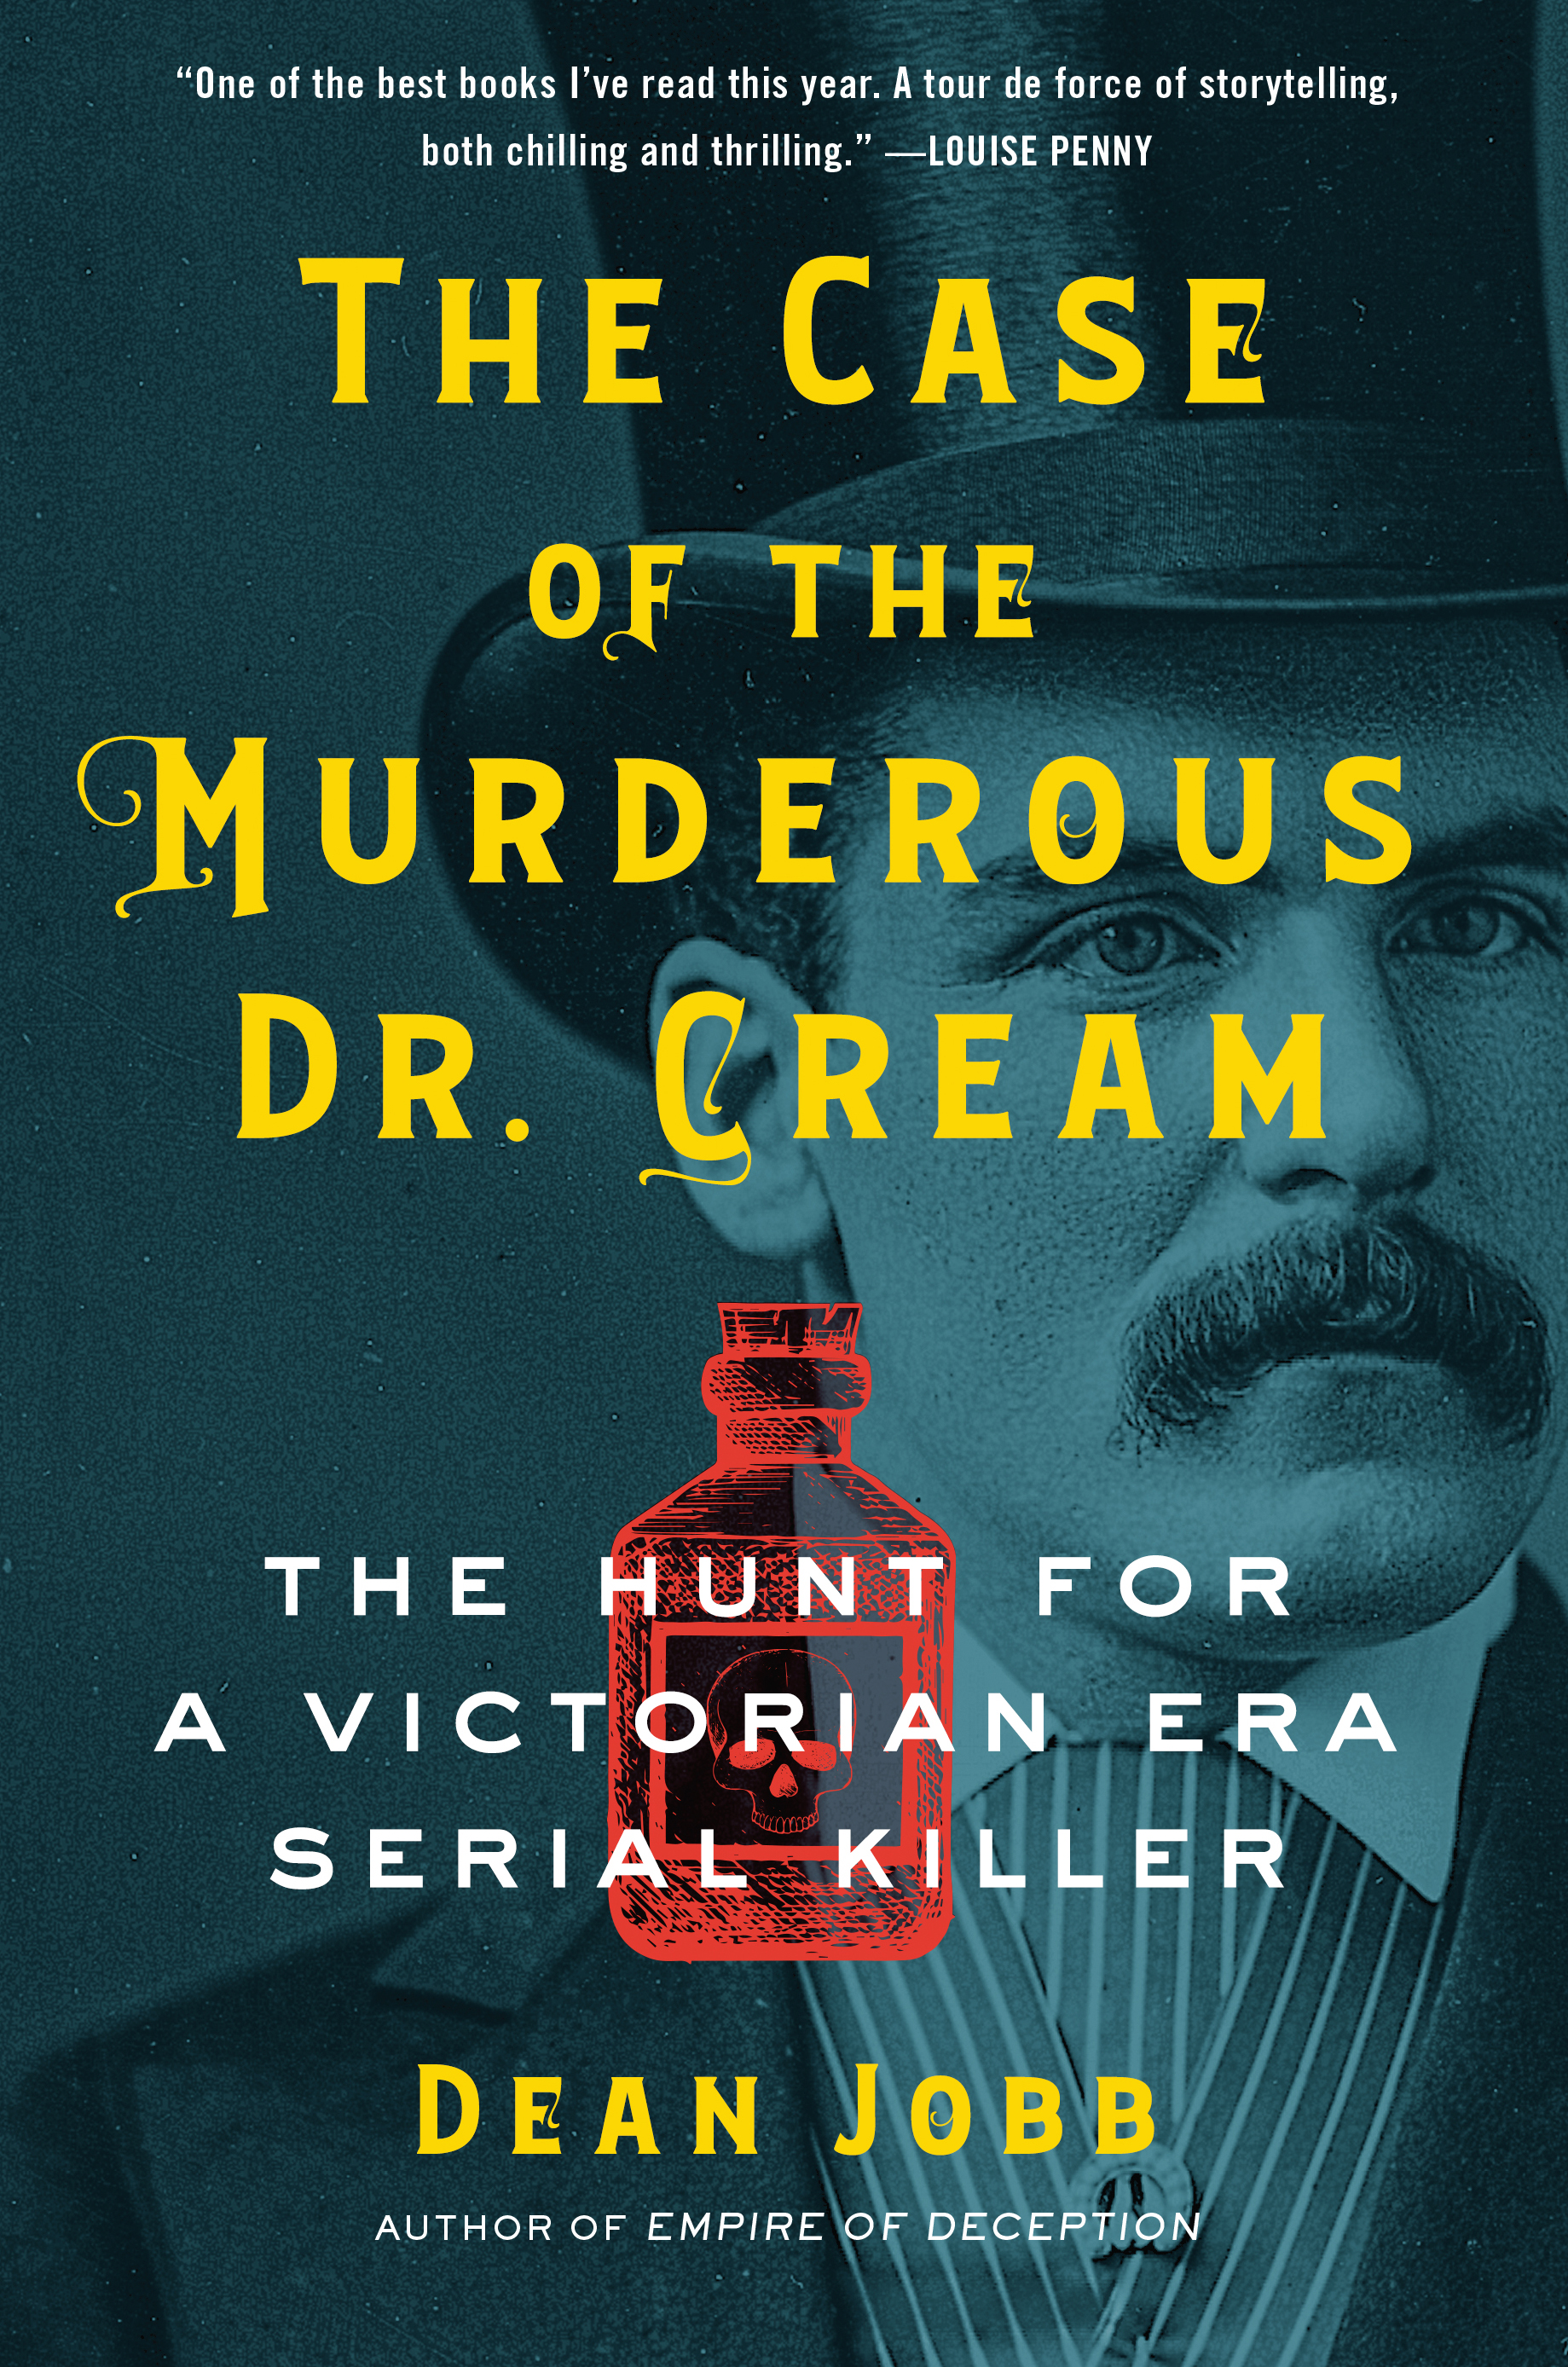 The Case of the Murderous Dr